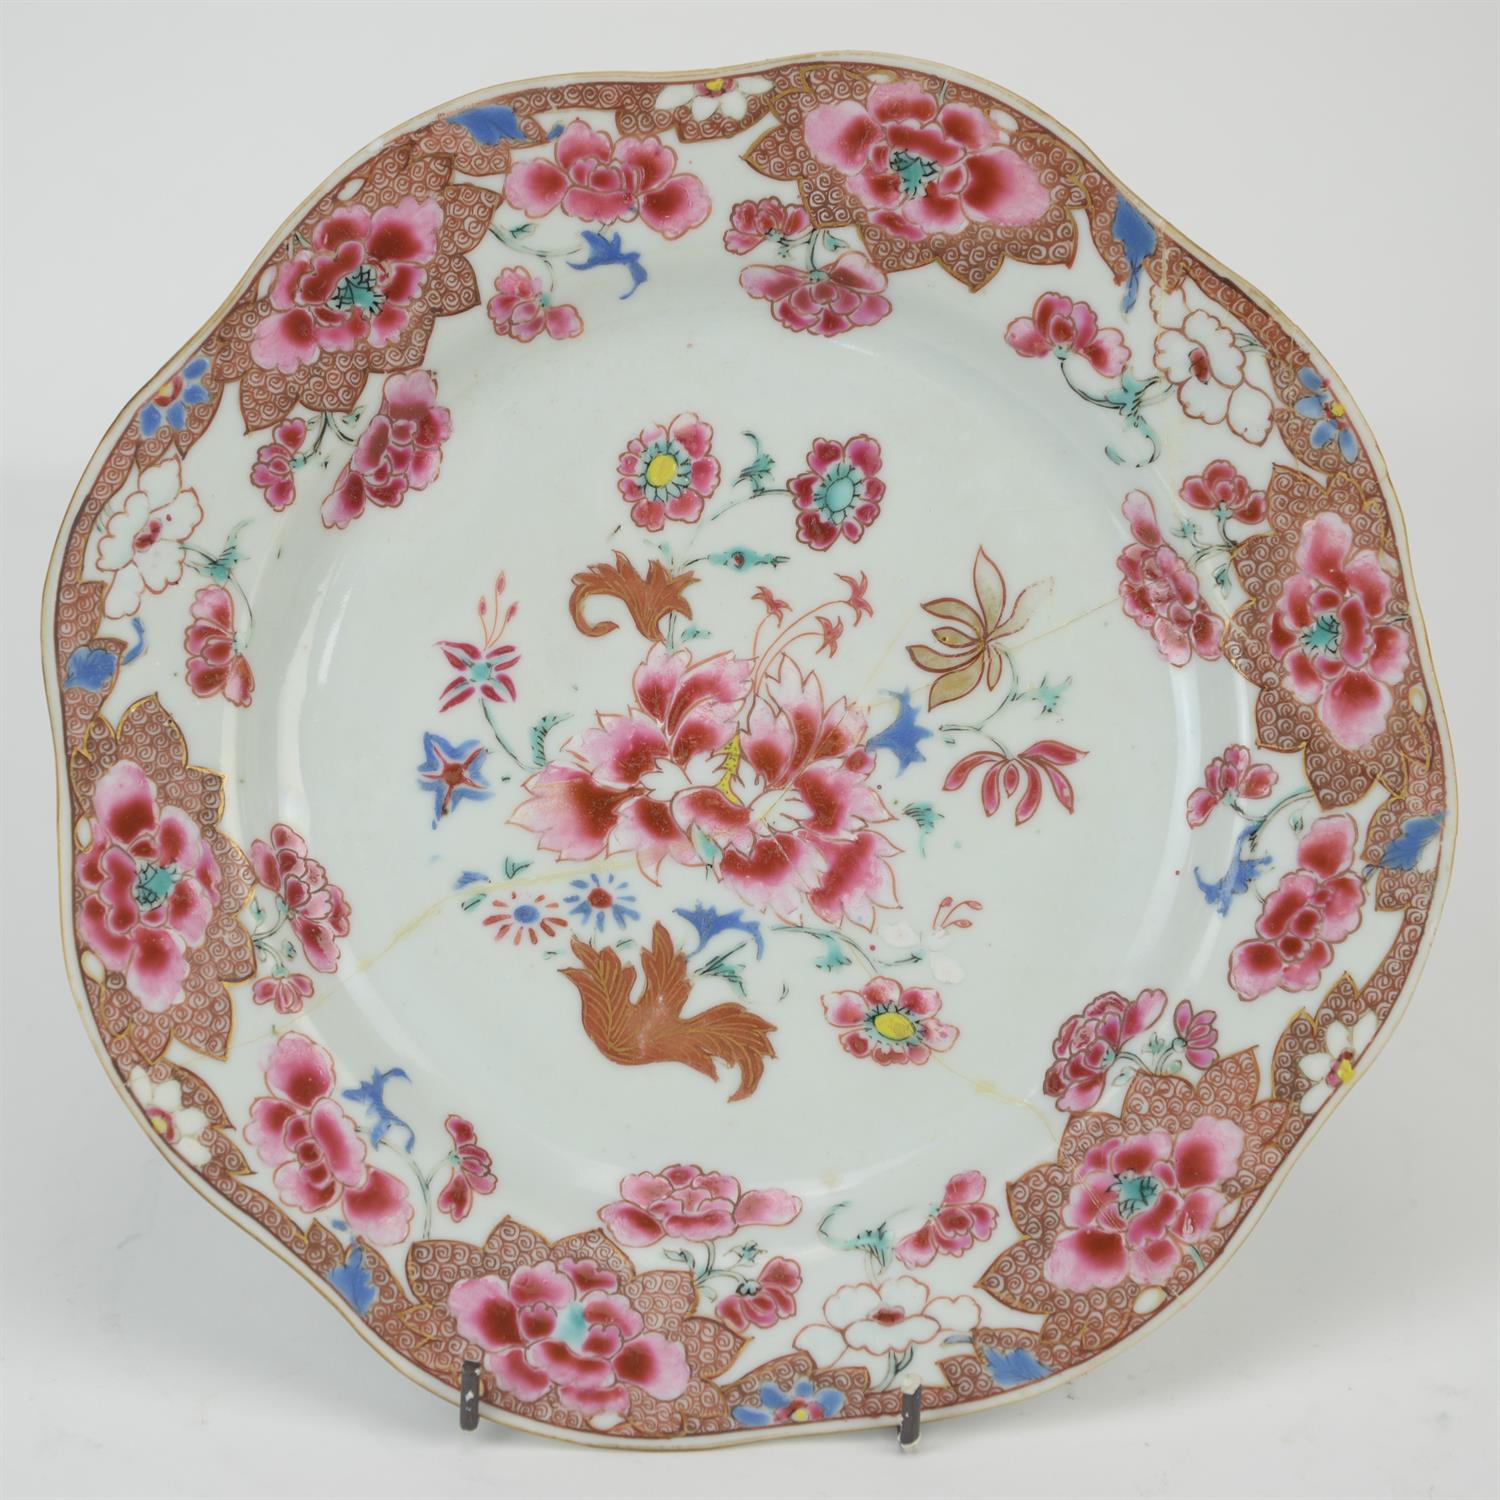 Eight famille rose dishes; each one decorated with floral designs and about 22.5 cm diameter, - Image 21 of 28